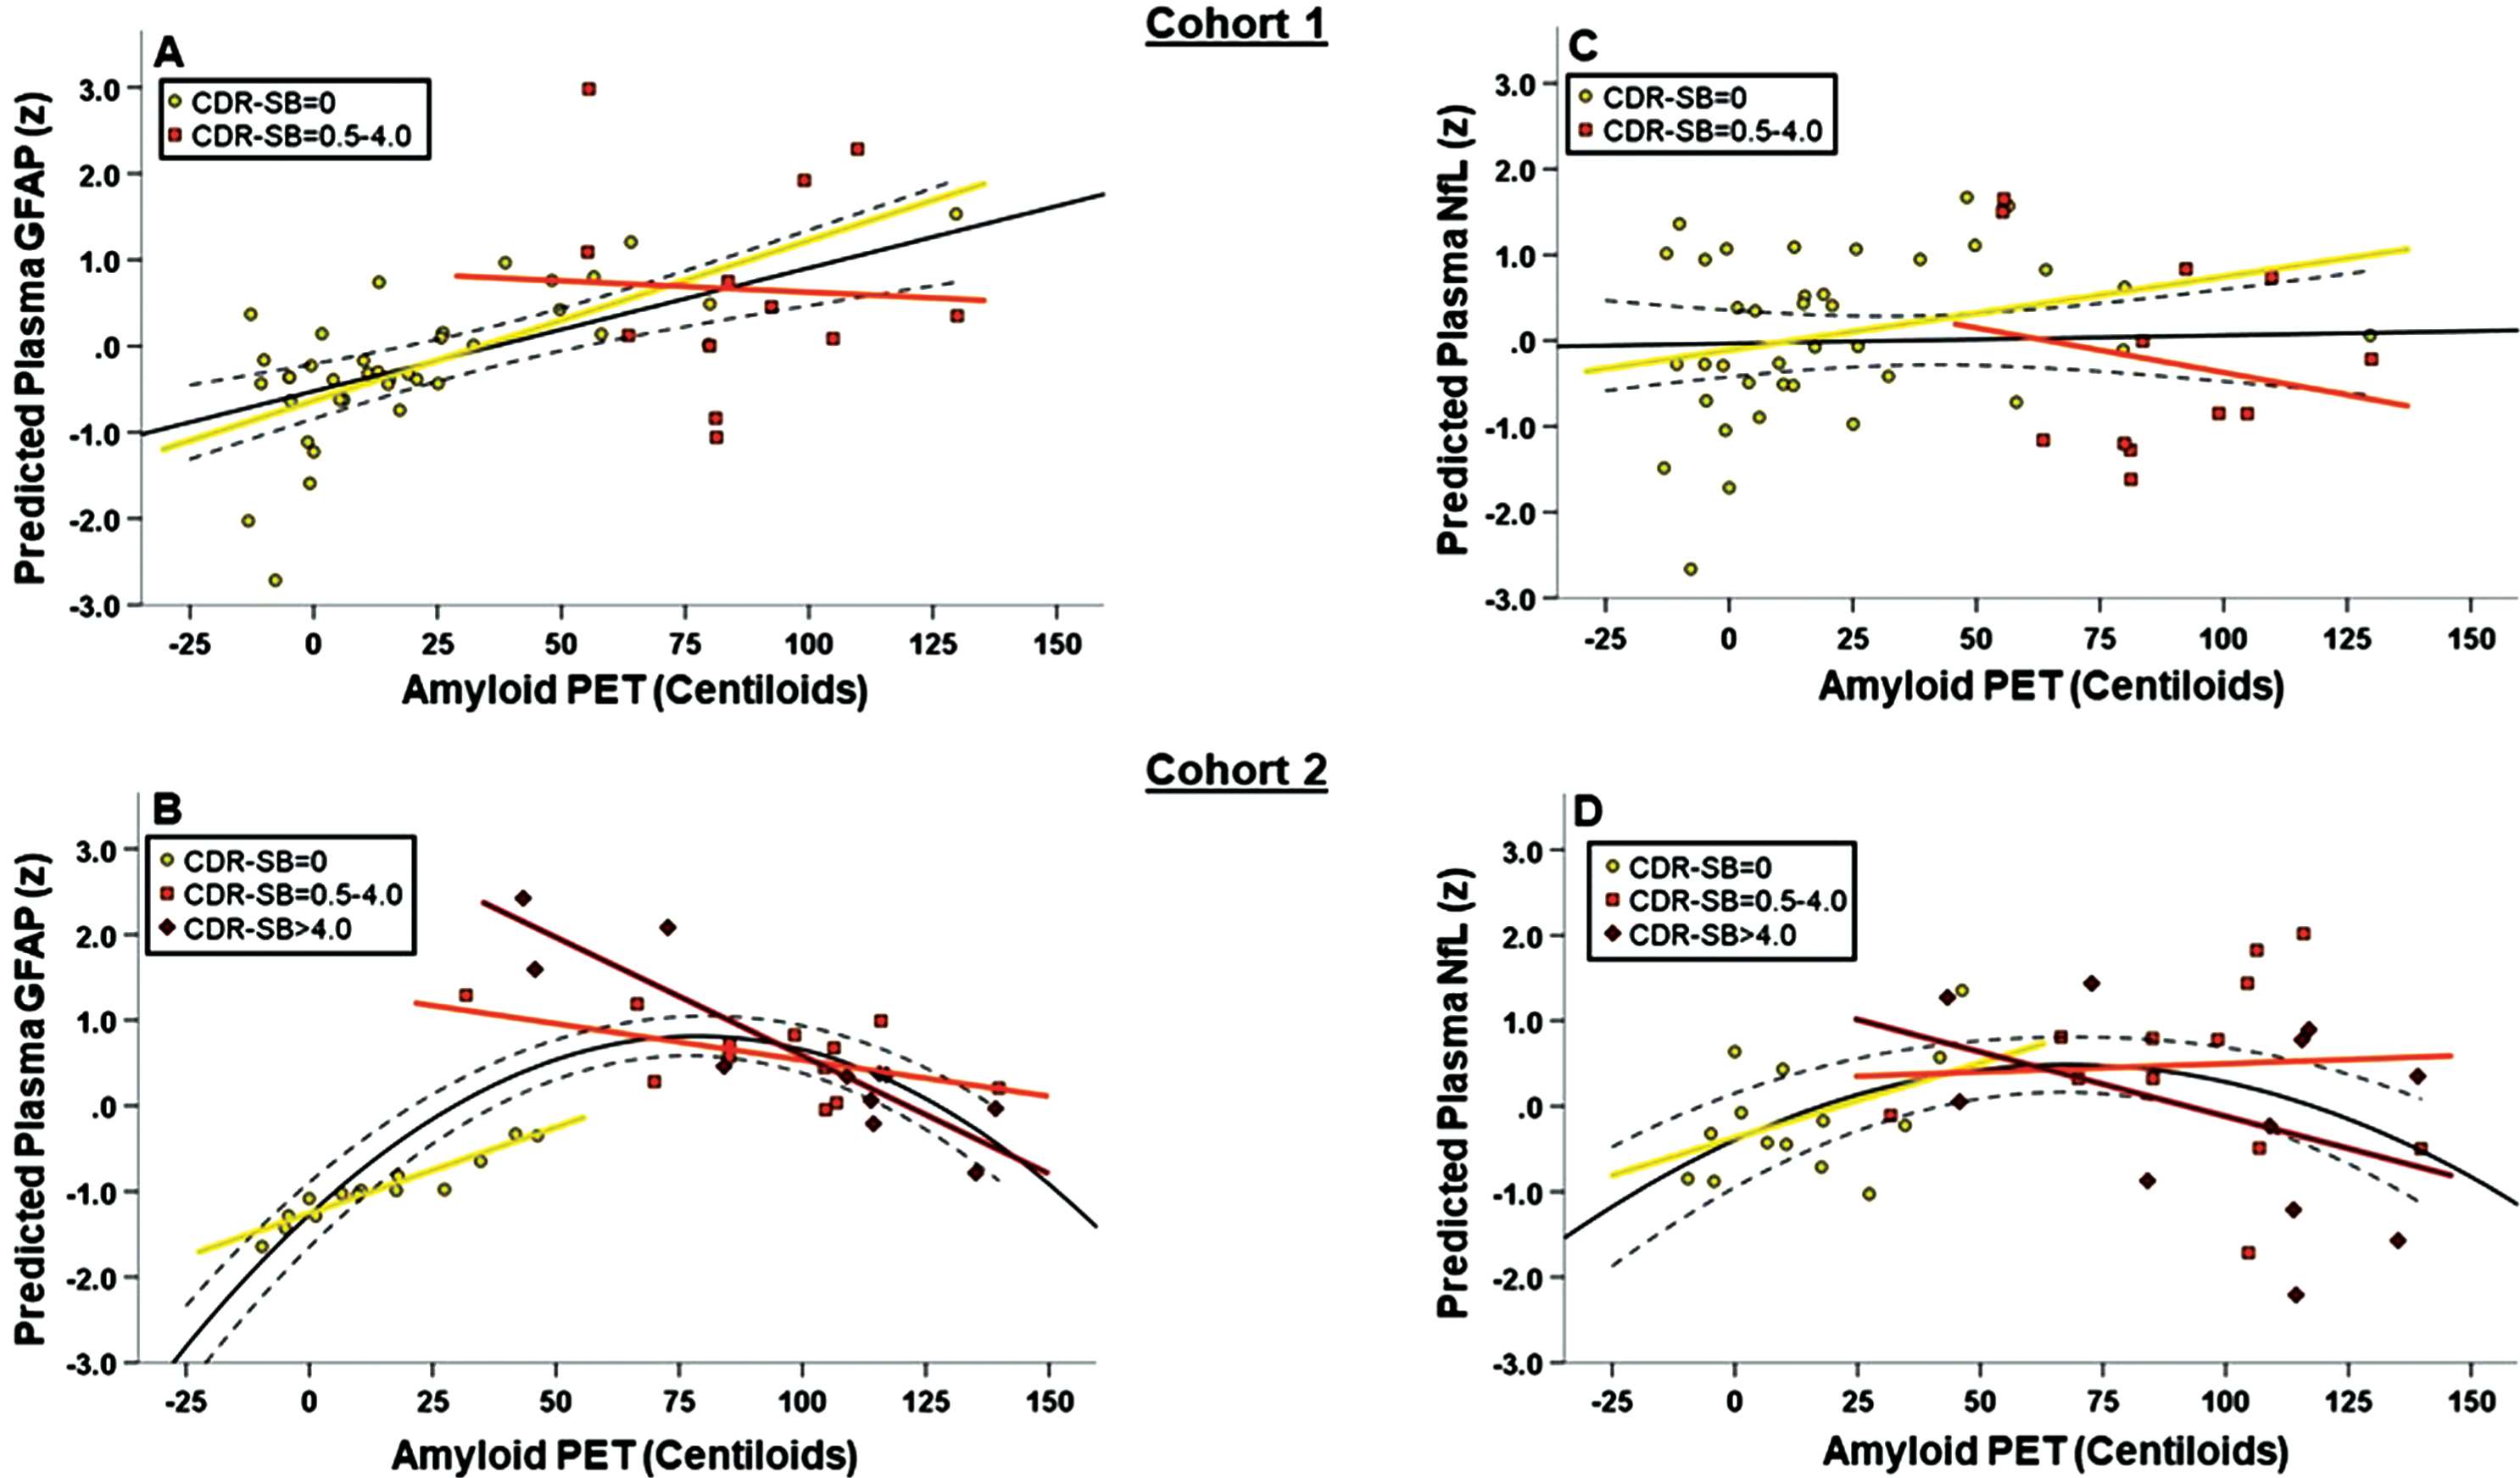 (A-D): Interaction between A β -PET and CDR-SB on plasma GFAP (A-B) and NfL (C-D) concentrations. All figures show standardized model-predicted plasma biomarker concentrations on the Y-axis. In both Cohort 1 (A) and Cohort 2 (B), higher Aβ-PET signal (measured in Centiloids; CLs) was associated with higher plasma GFAP in cases with CDR-SB=0 (yellow line) but not CDR-SB=0.5-4.0 (orange line). For cases in the dementia range (CDR-SB>4.0, red line, Cohort 2 only), higher Aβ-PET CLs was associated with lower plasma GFAP. The Aβ-PET CLs x CDR-SB interaction was statistically significant only in Cohort 2 for plasma GFAP. These associations largely were not observed for plasma NfL (C and D) except for an apparent association of higher Aβ-PET CLs with higher plasma NfL in Cohort 2 cases with CDR-SB=0 (Pearson’s r = .40).